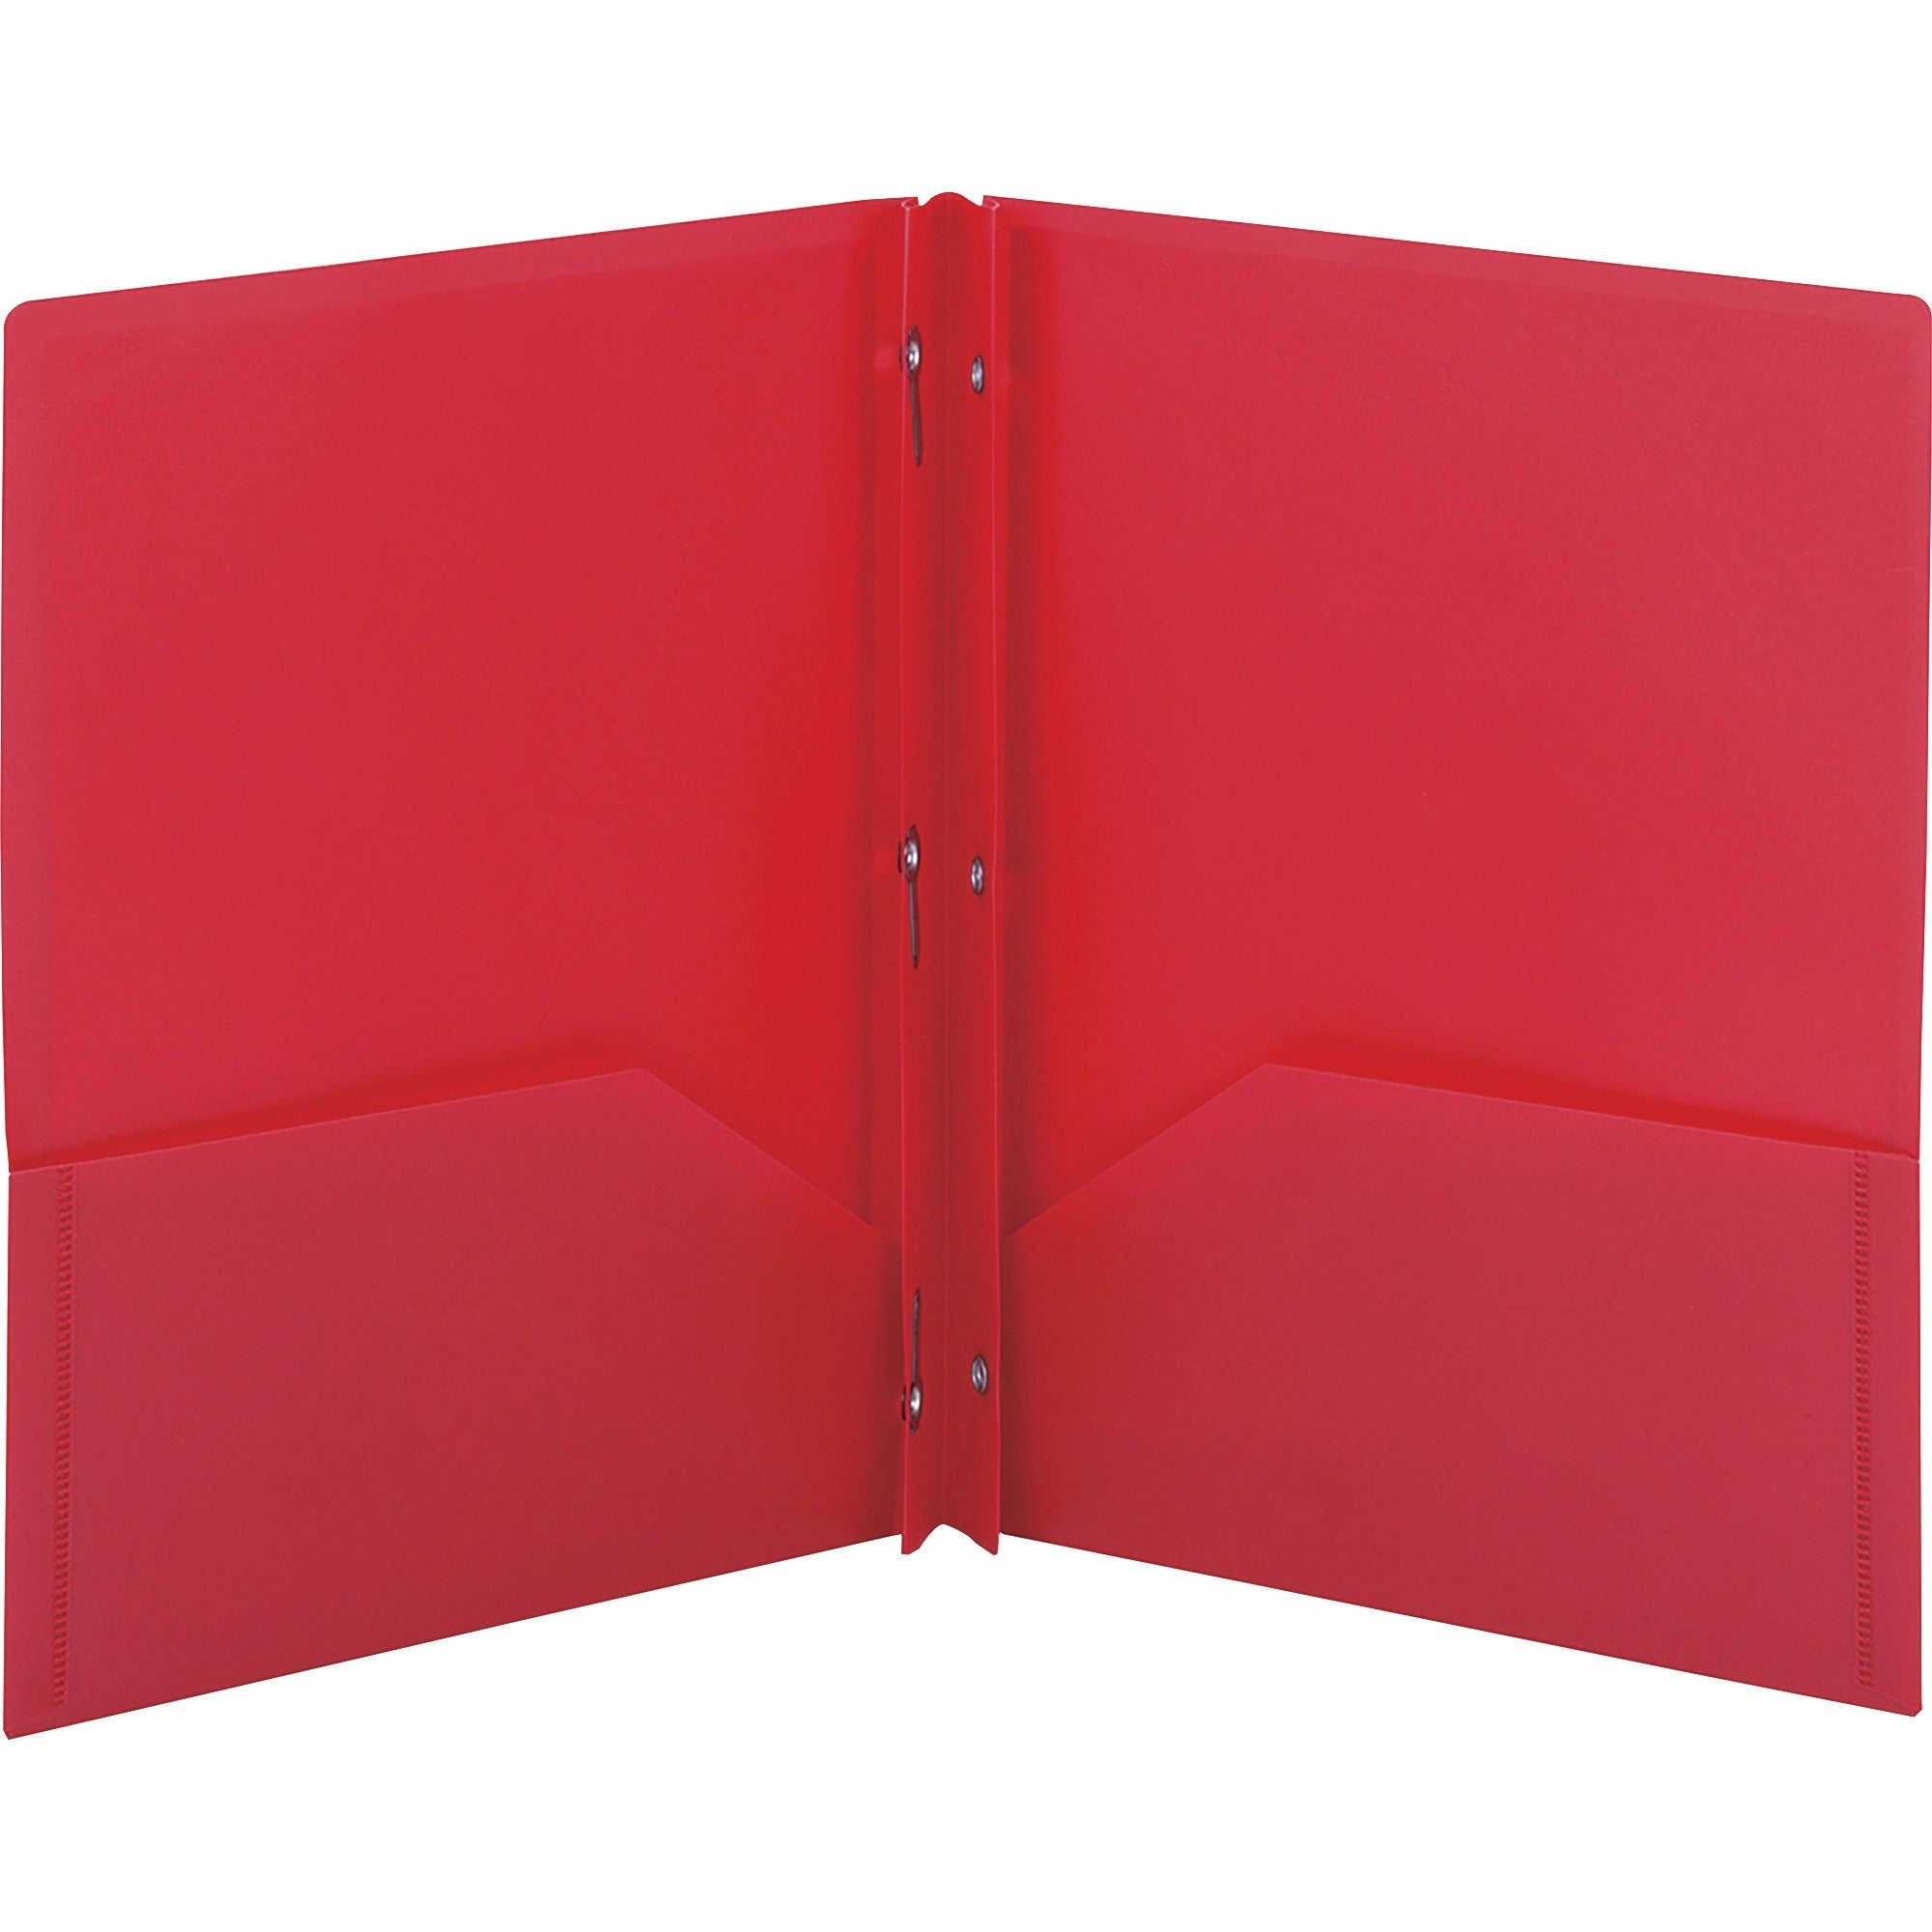 smead-letter-fastener-folder-8-1-2-x-11-180-sheet-capacity-2-x-double-tang-fasteners-2-inside-back-pockets-red-72-carton_smd87730 - 1